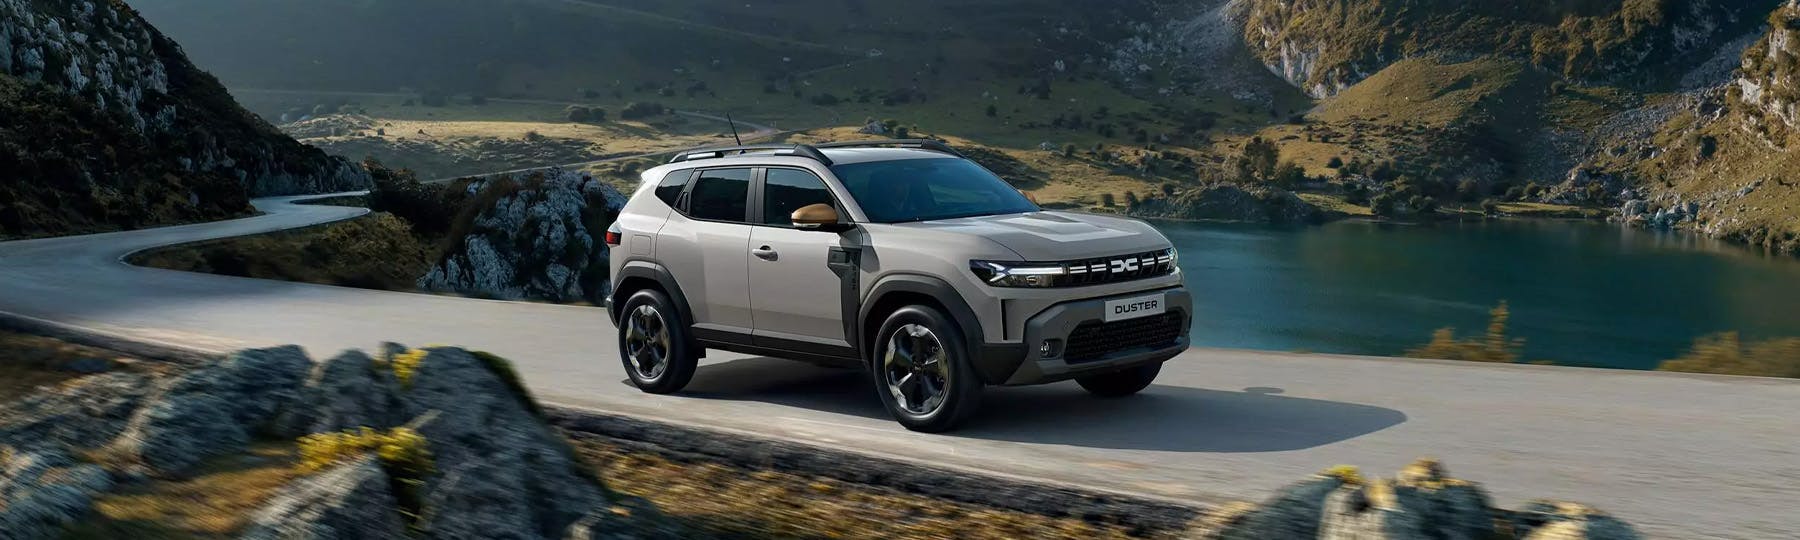 All-new Dacia Duster